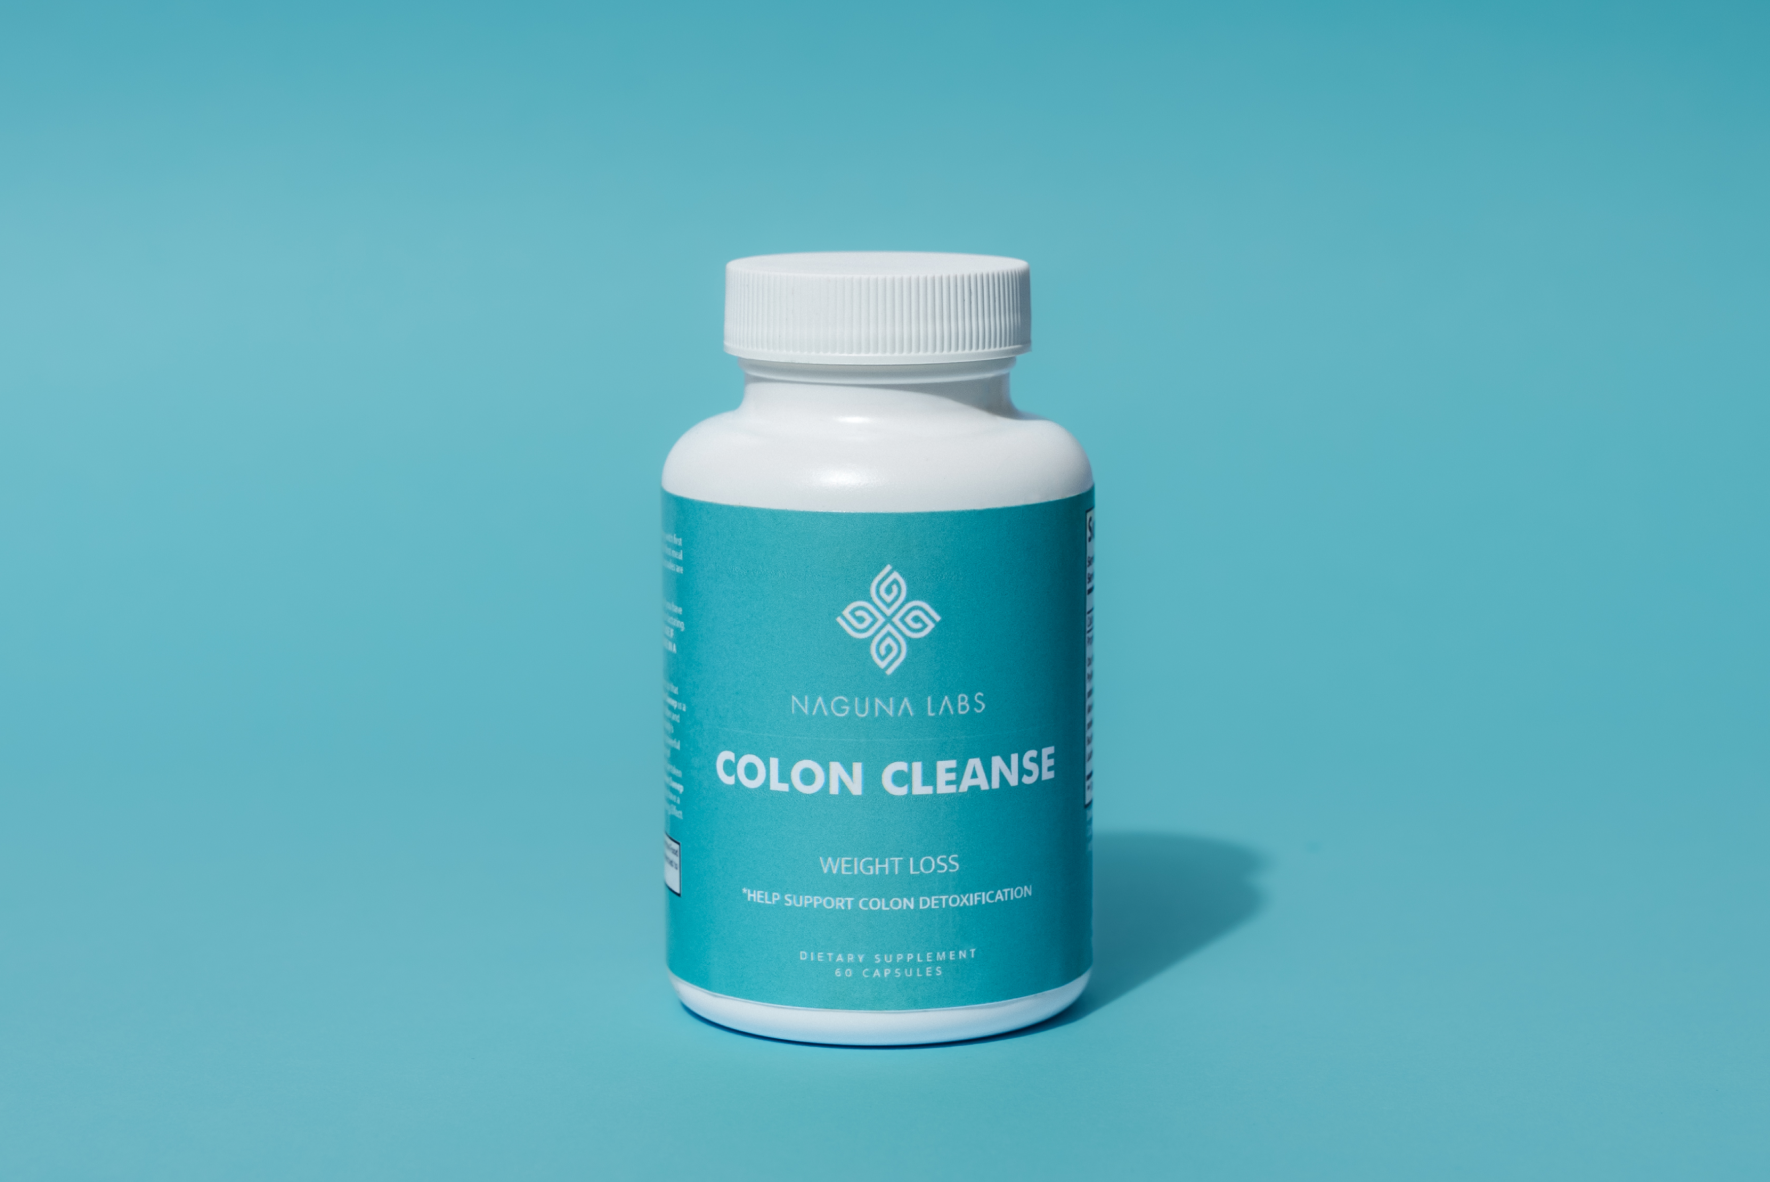 Colon Cleanse Product Image